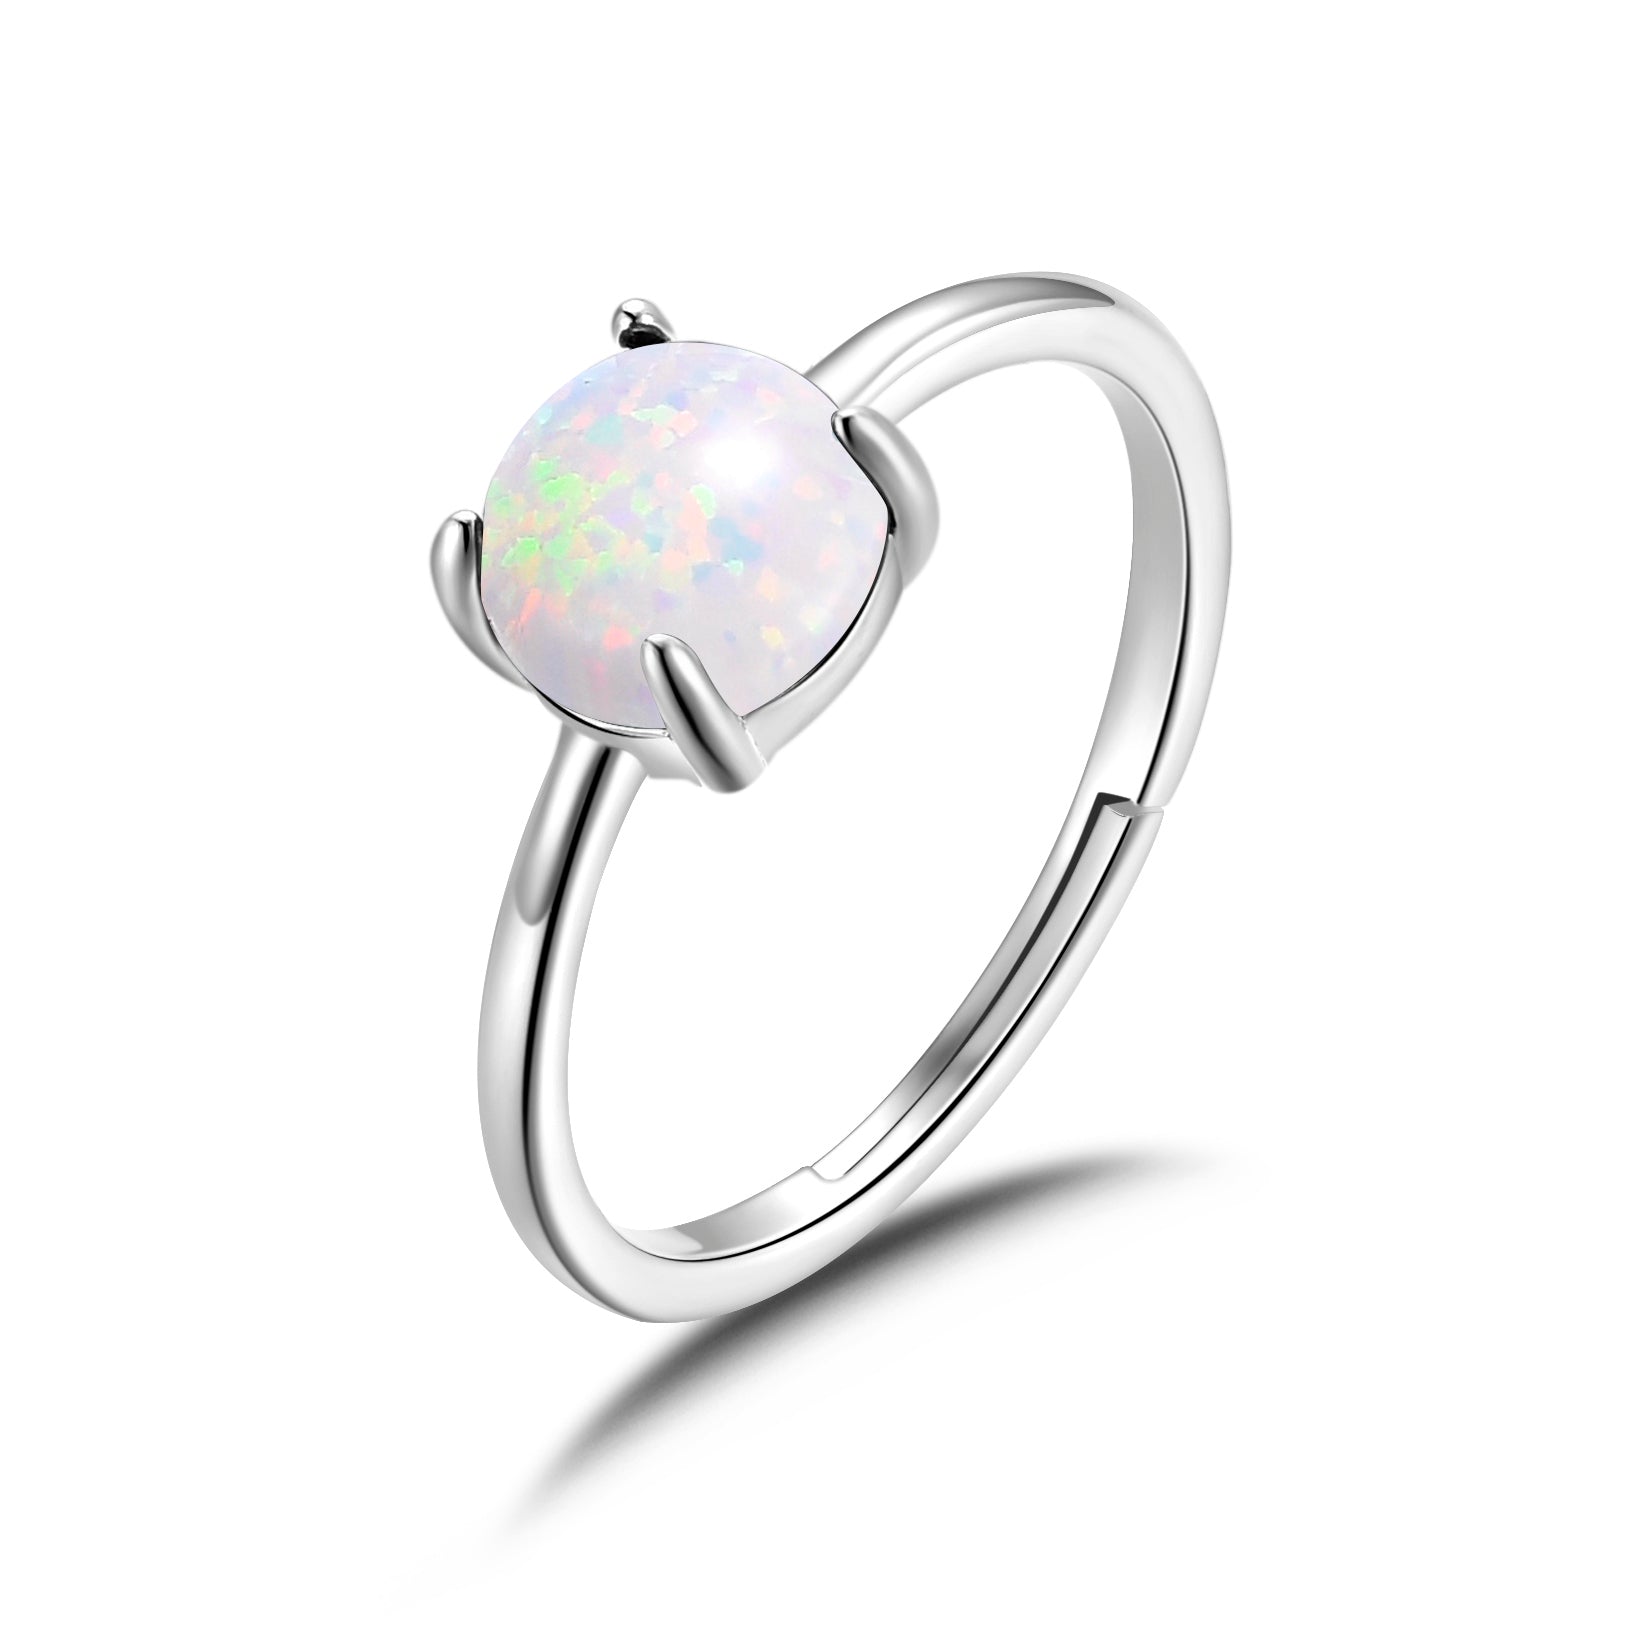 Synthetic White Opal Adjustable Ring